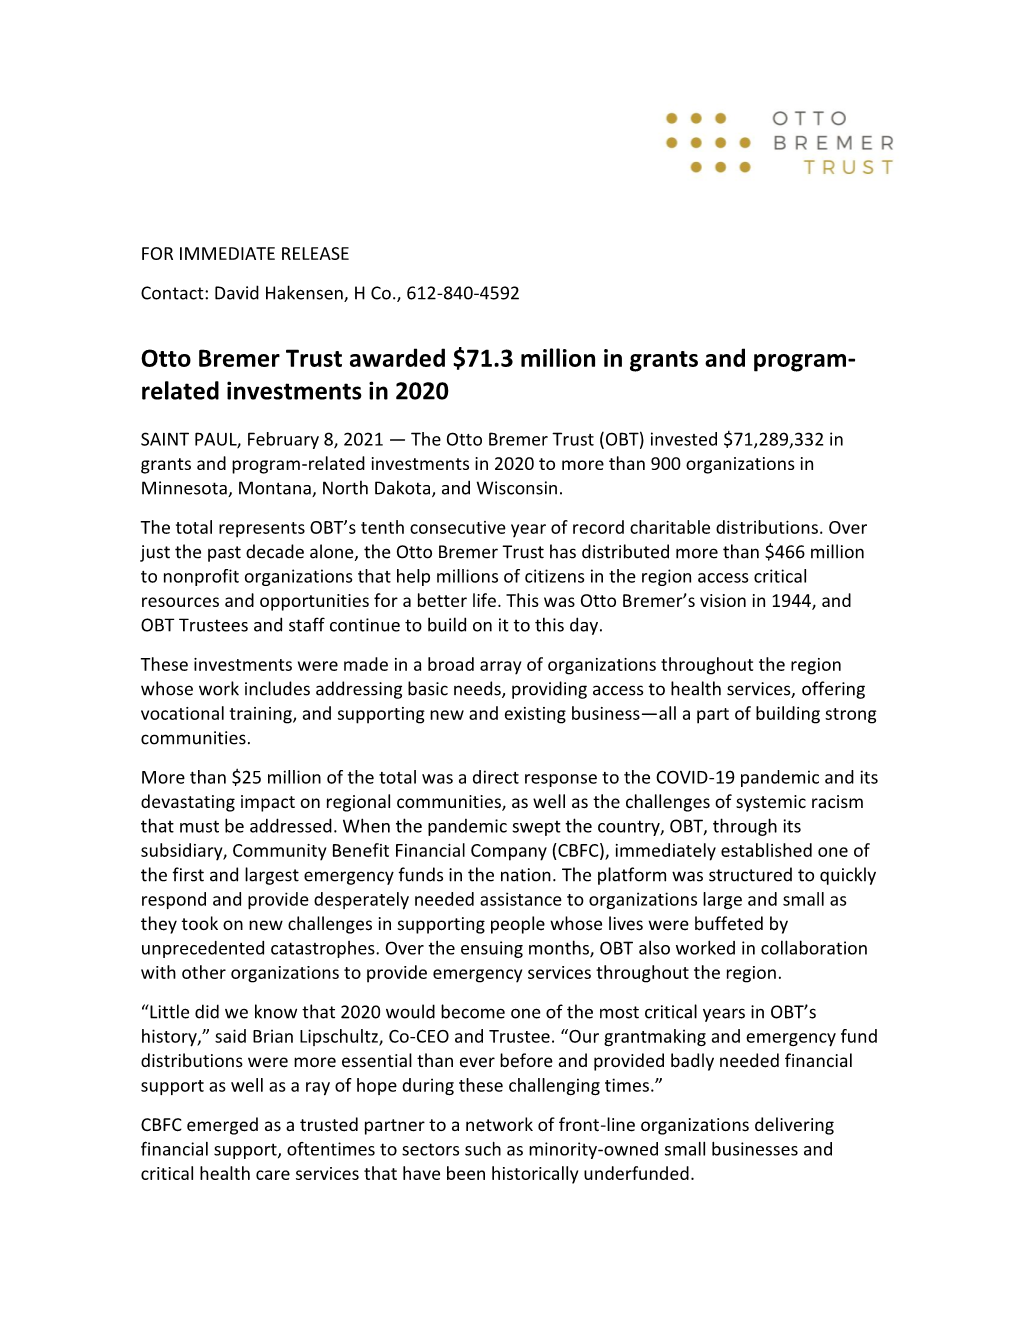 Otto Bremer Trust Awarded $71.3 Million in Grants and Program- Related Investments in 2020